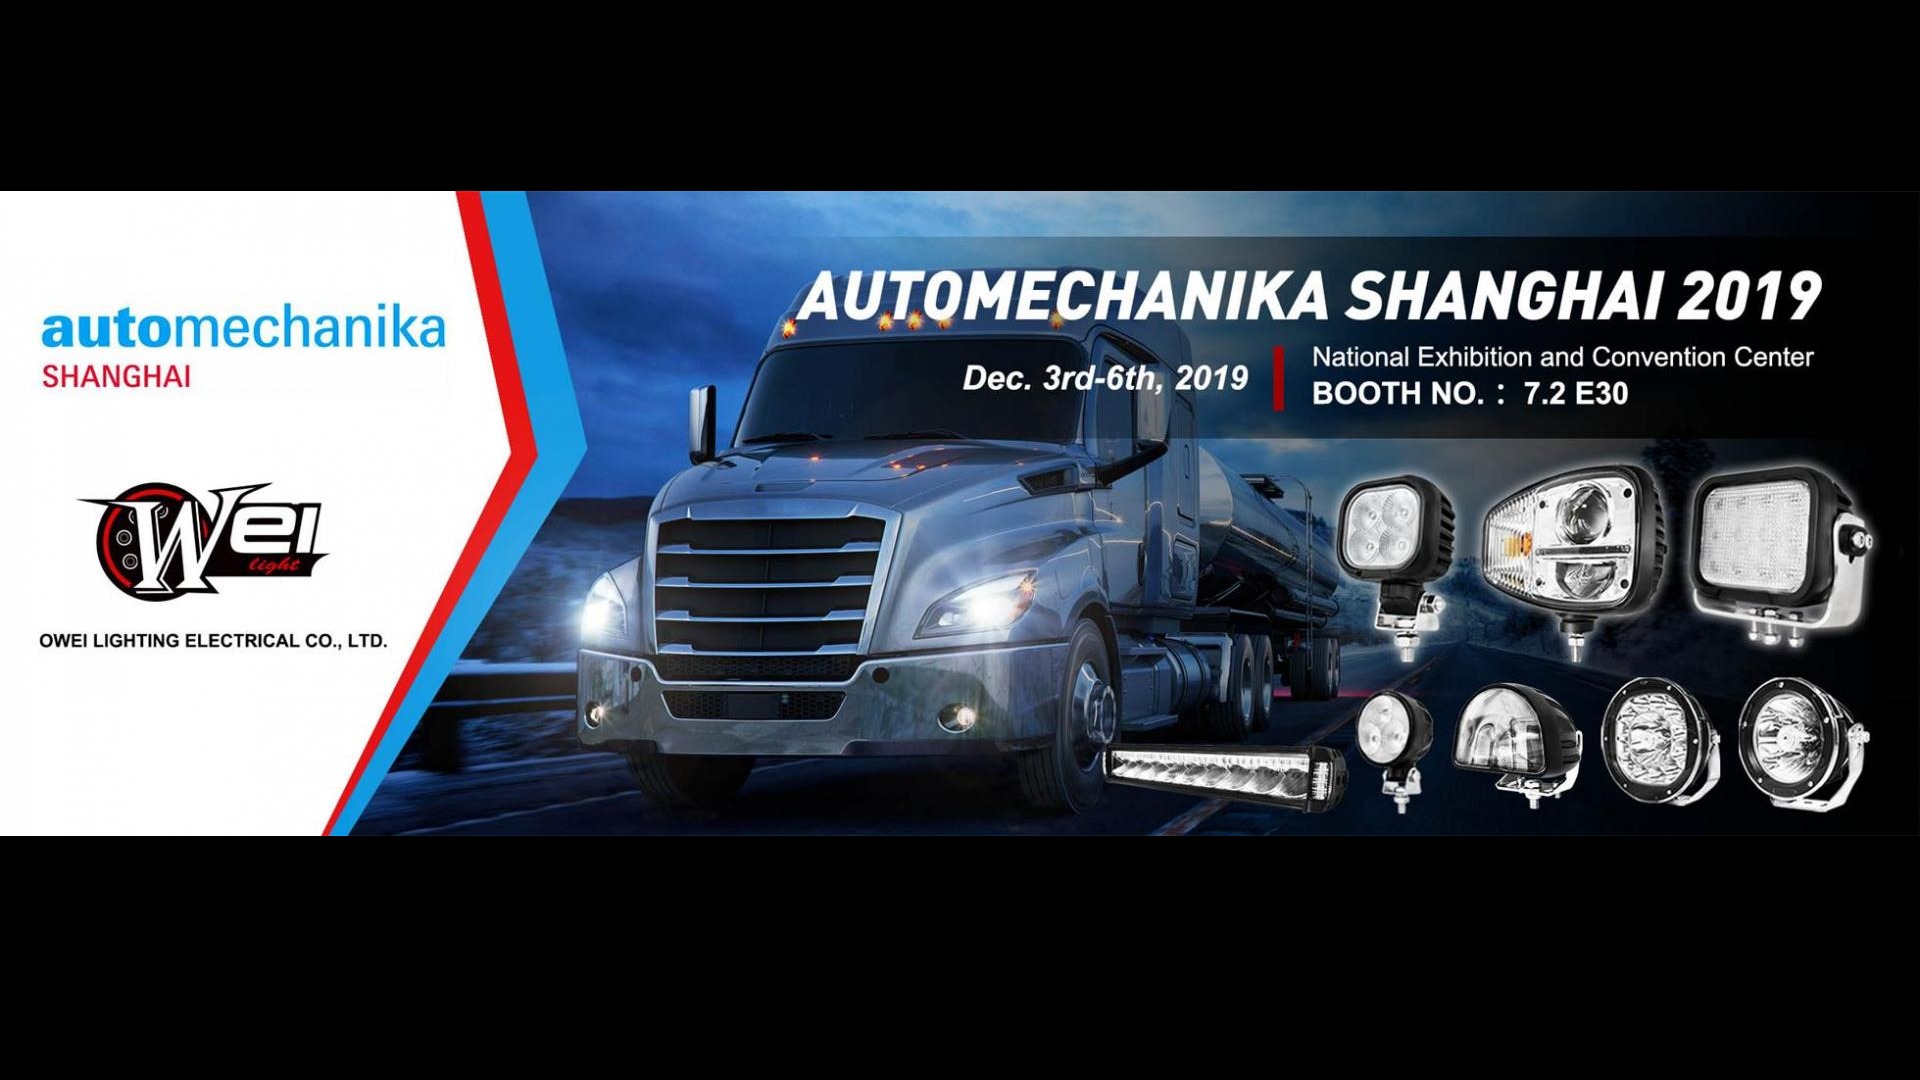 OWei Light Attends Automechanika Shanghai on Dec 3rd-6th, 2019, Stand 7.2 E30